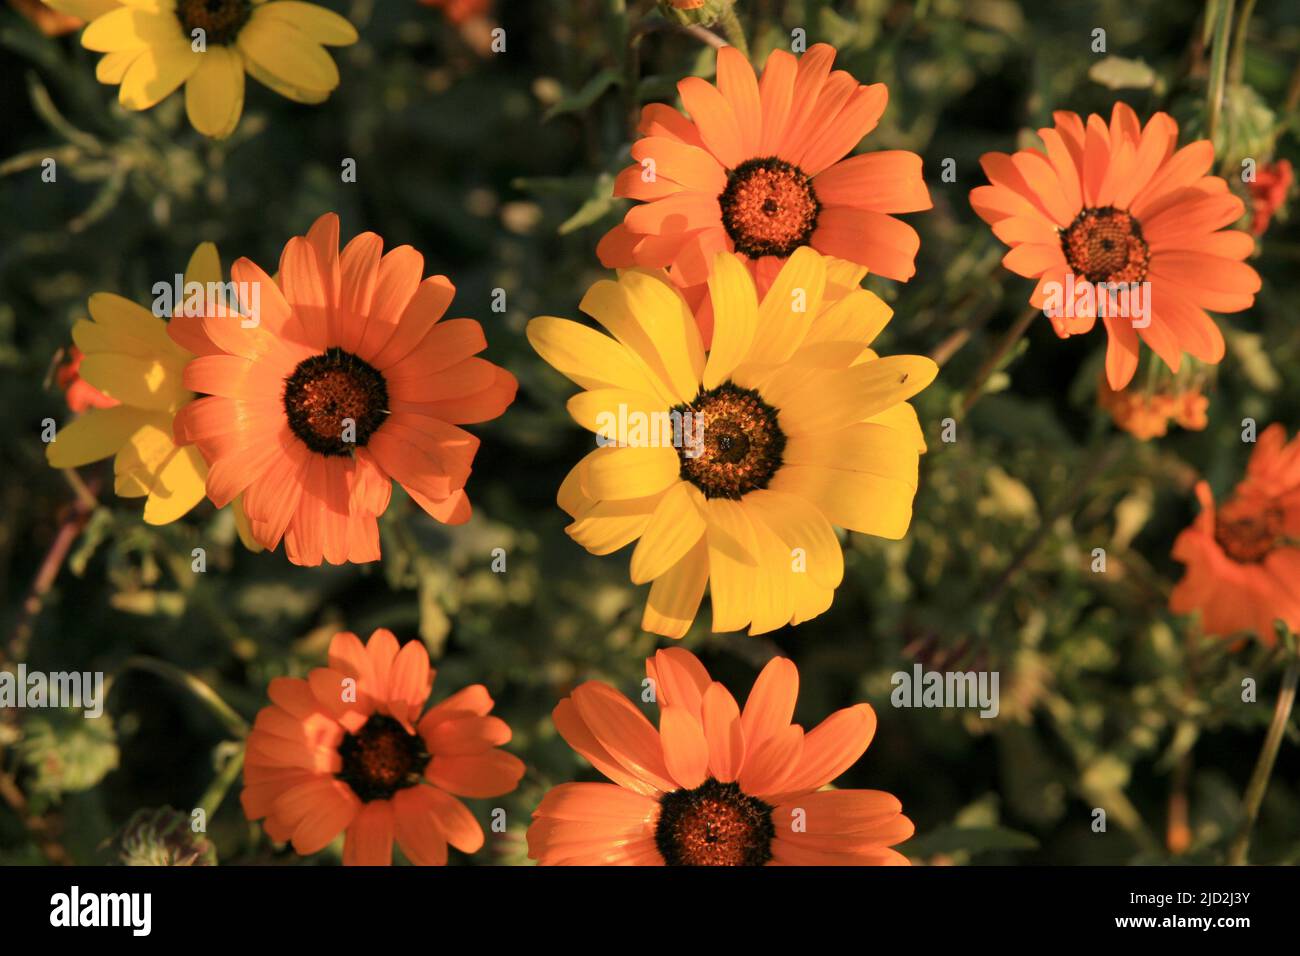 Close-up of Namaqualand daisies in flower bed, Voortrekker Monument Museum, Pretoria/Tshwane, Gauteng, South Africa. Stock Photo